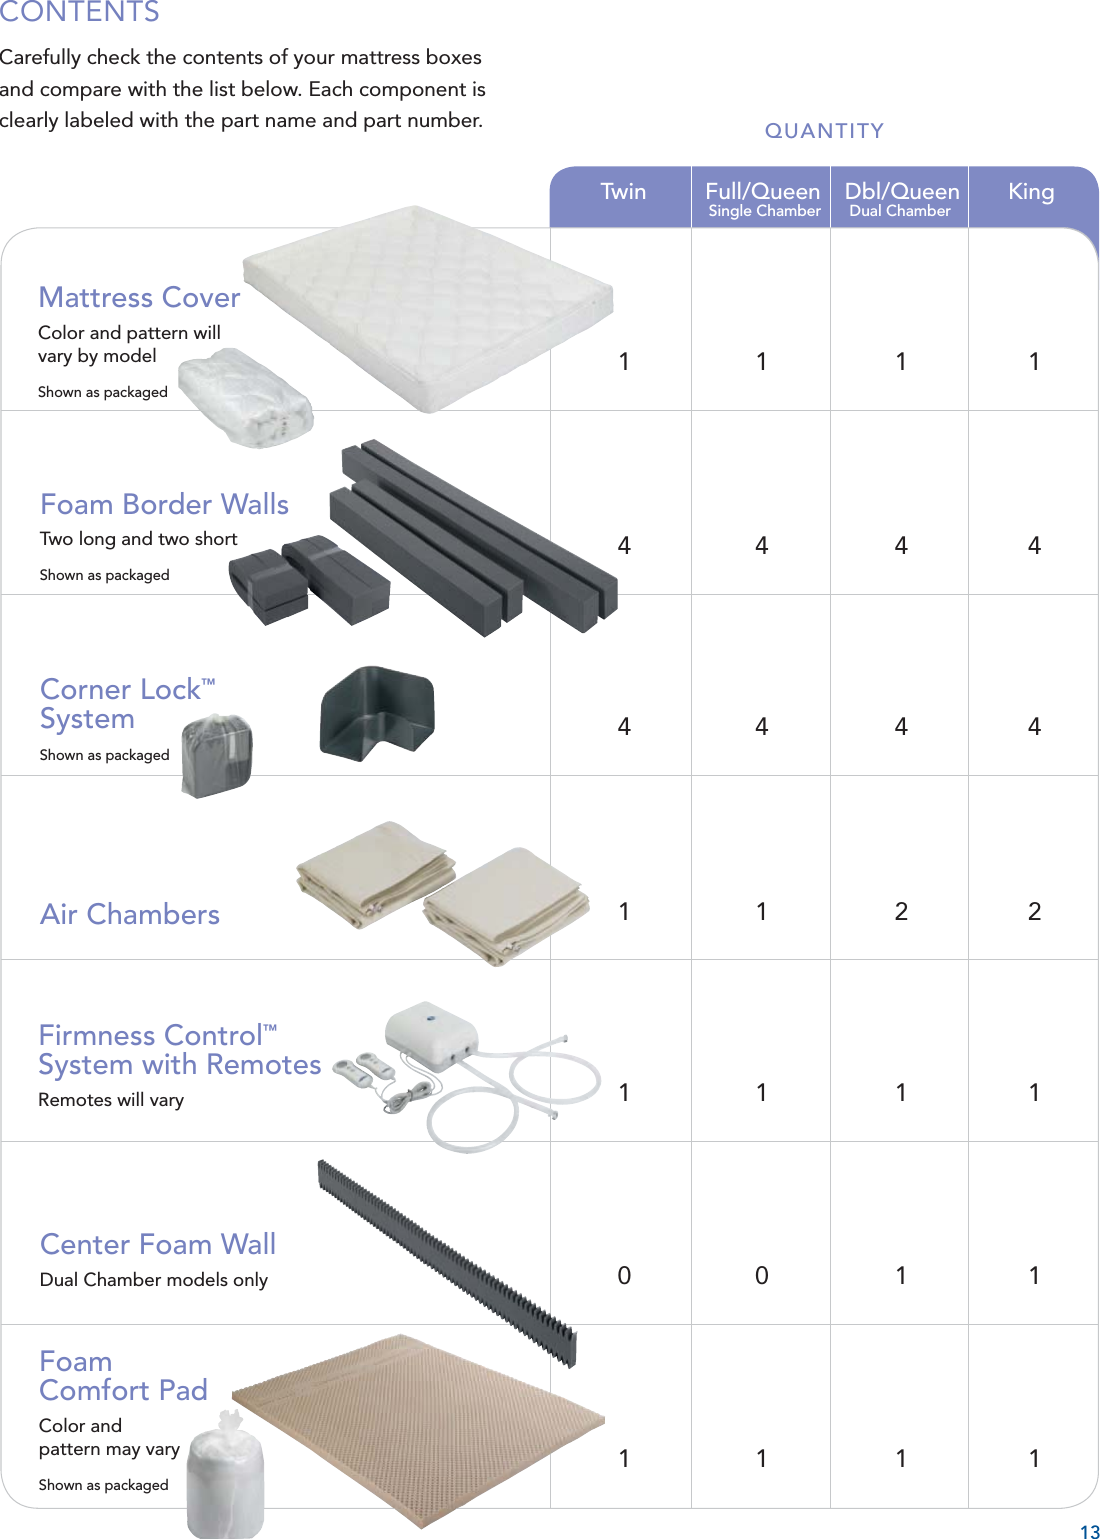 CONTENTSCarefully check the contents of your mattress boxes and compare with the list below. Each component is clearly labeled with the part name and part number.Mattress CoverColor and pattern will vary by modelShown as packagedFoam Border WallsTwo long and two shortShown as packagedCorner Lock™SystemShown as packagedAir ChambersFirmness Control™System with RemotesRemotes will varyCenter Foam WallDual Chamber models only    Single Chamber  Dual Chamber 1  1  1  1 4  4  4  4 4  4  4  4 1  1  2  2 1  1  1  1 0  0  1  1 1  1  1  1FoamComfort PadColor andpattern may varyShown as packagedQUANTITY13 Twin  Full/Queen Dbl/Queen King